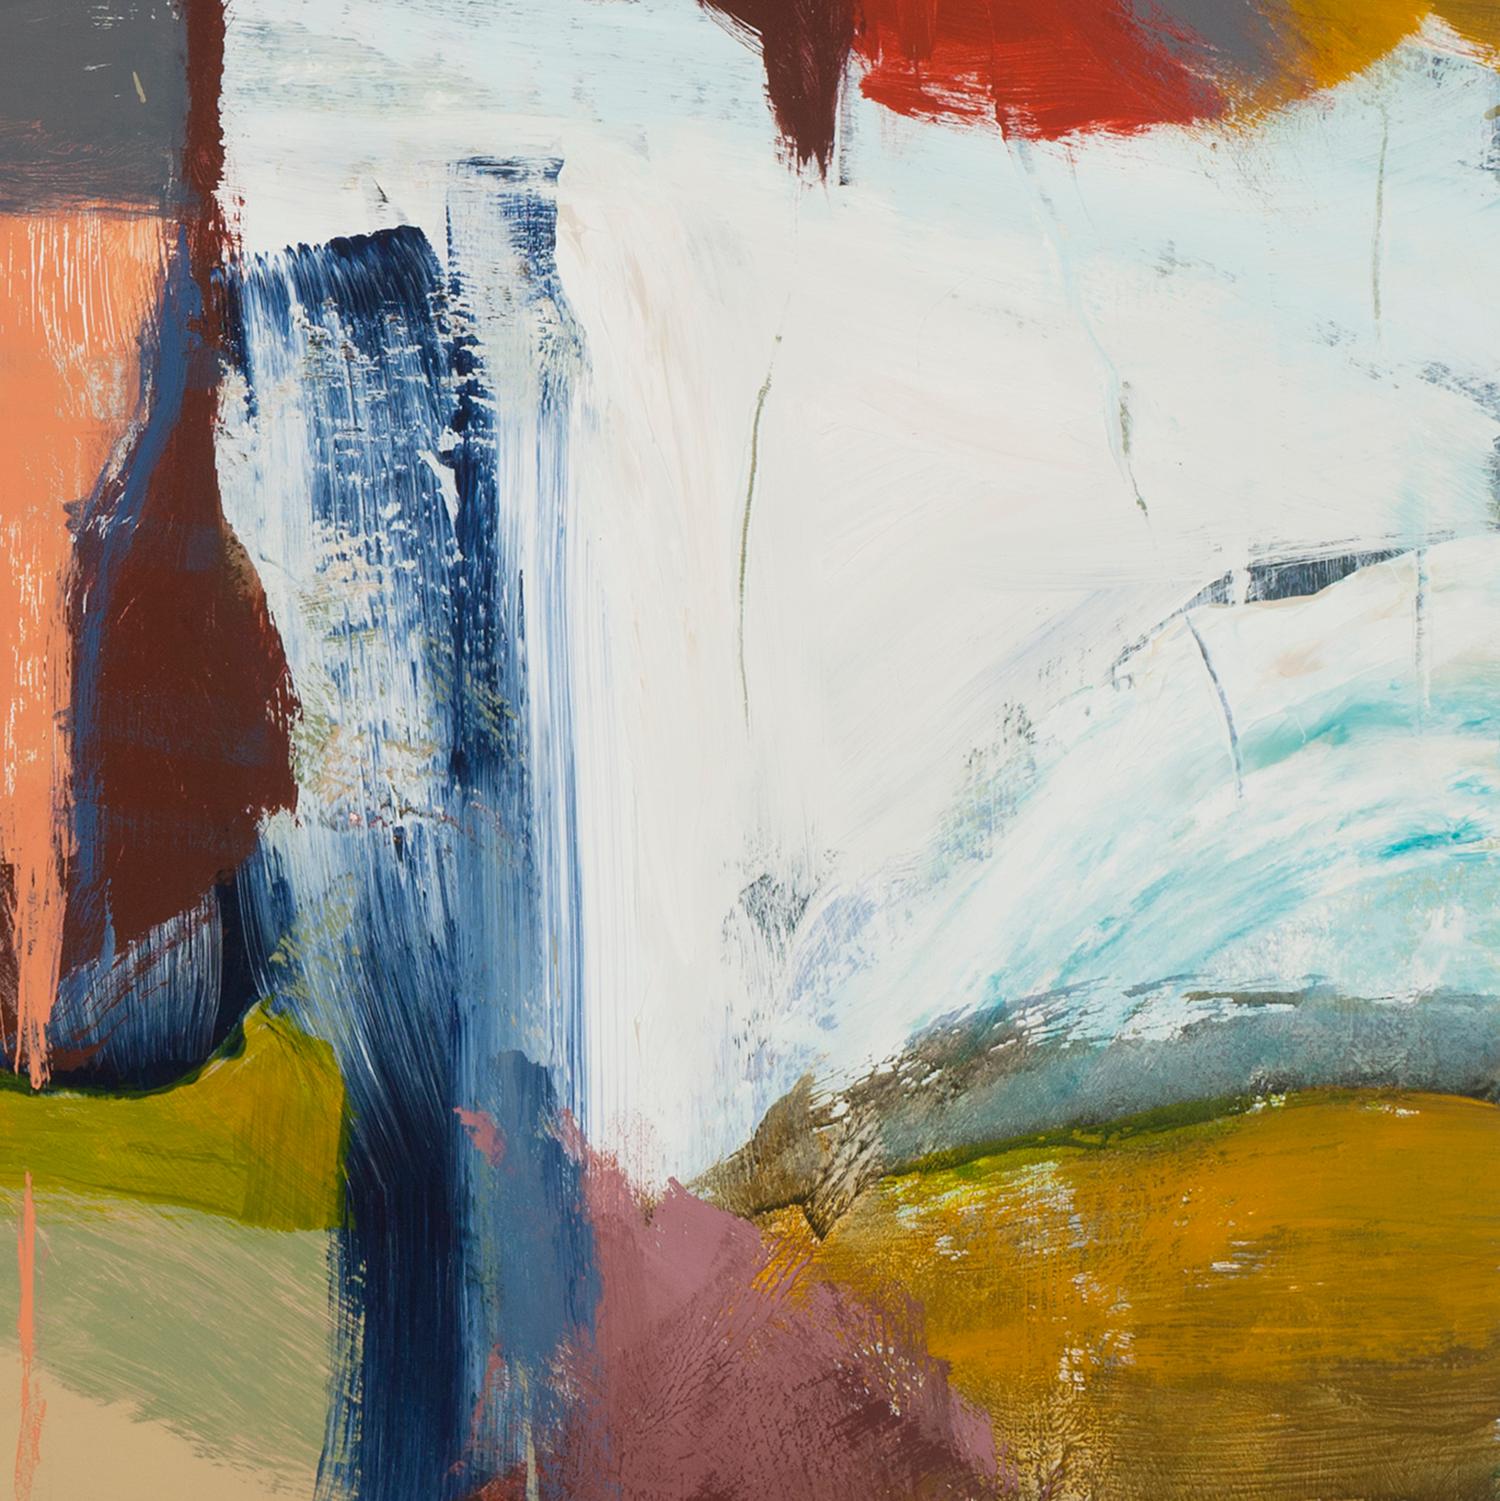 Melissa Shaak’s “A Place I Know” is a 50 x 38 inch abstract acrylic painting on paper. Three small, bright-orange objects are set in the middle ground of a loose landscape or dreamscape. The surroundings contain a playful array of paint textures,